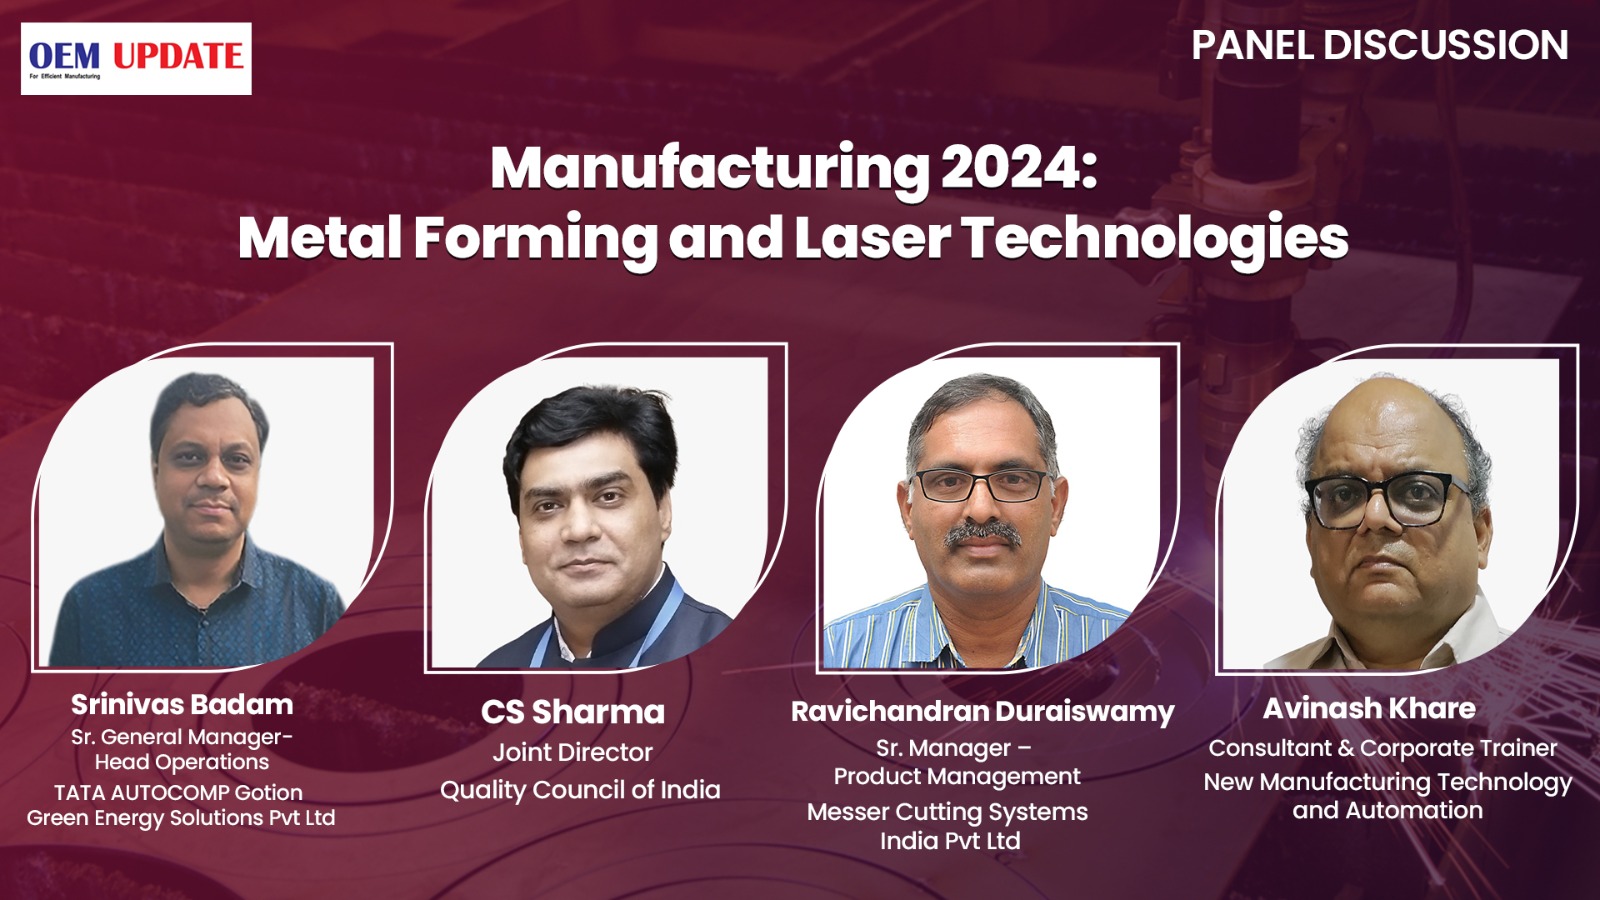 Manufacturing 2024: Metal forming and laser technologies | Panel Discussion | OEM Update Magazine